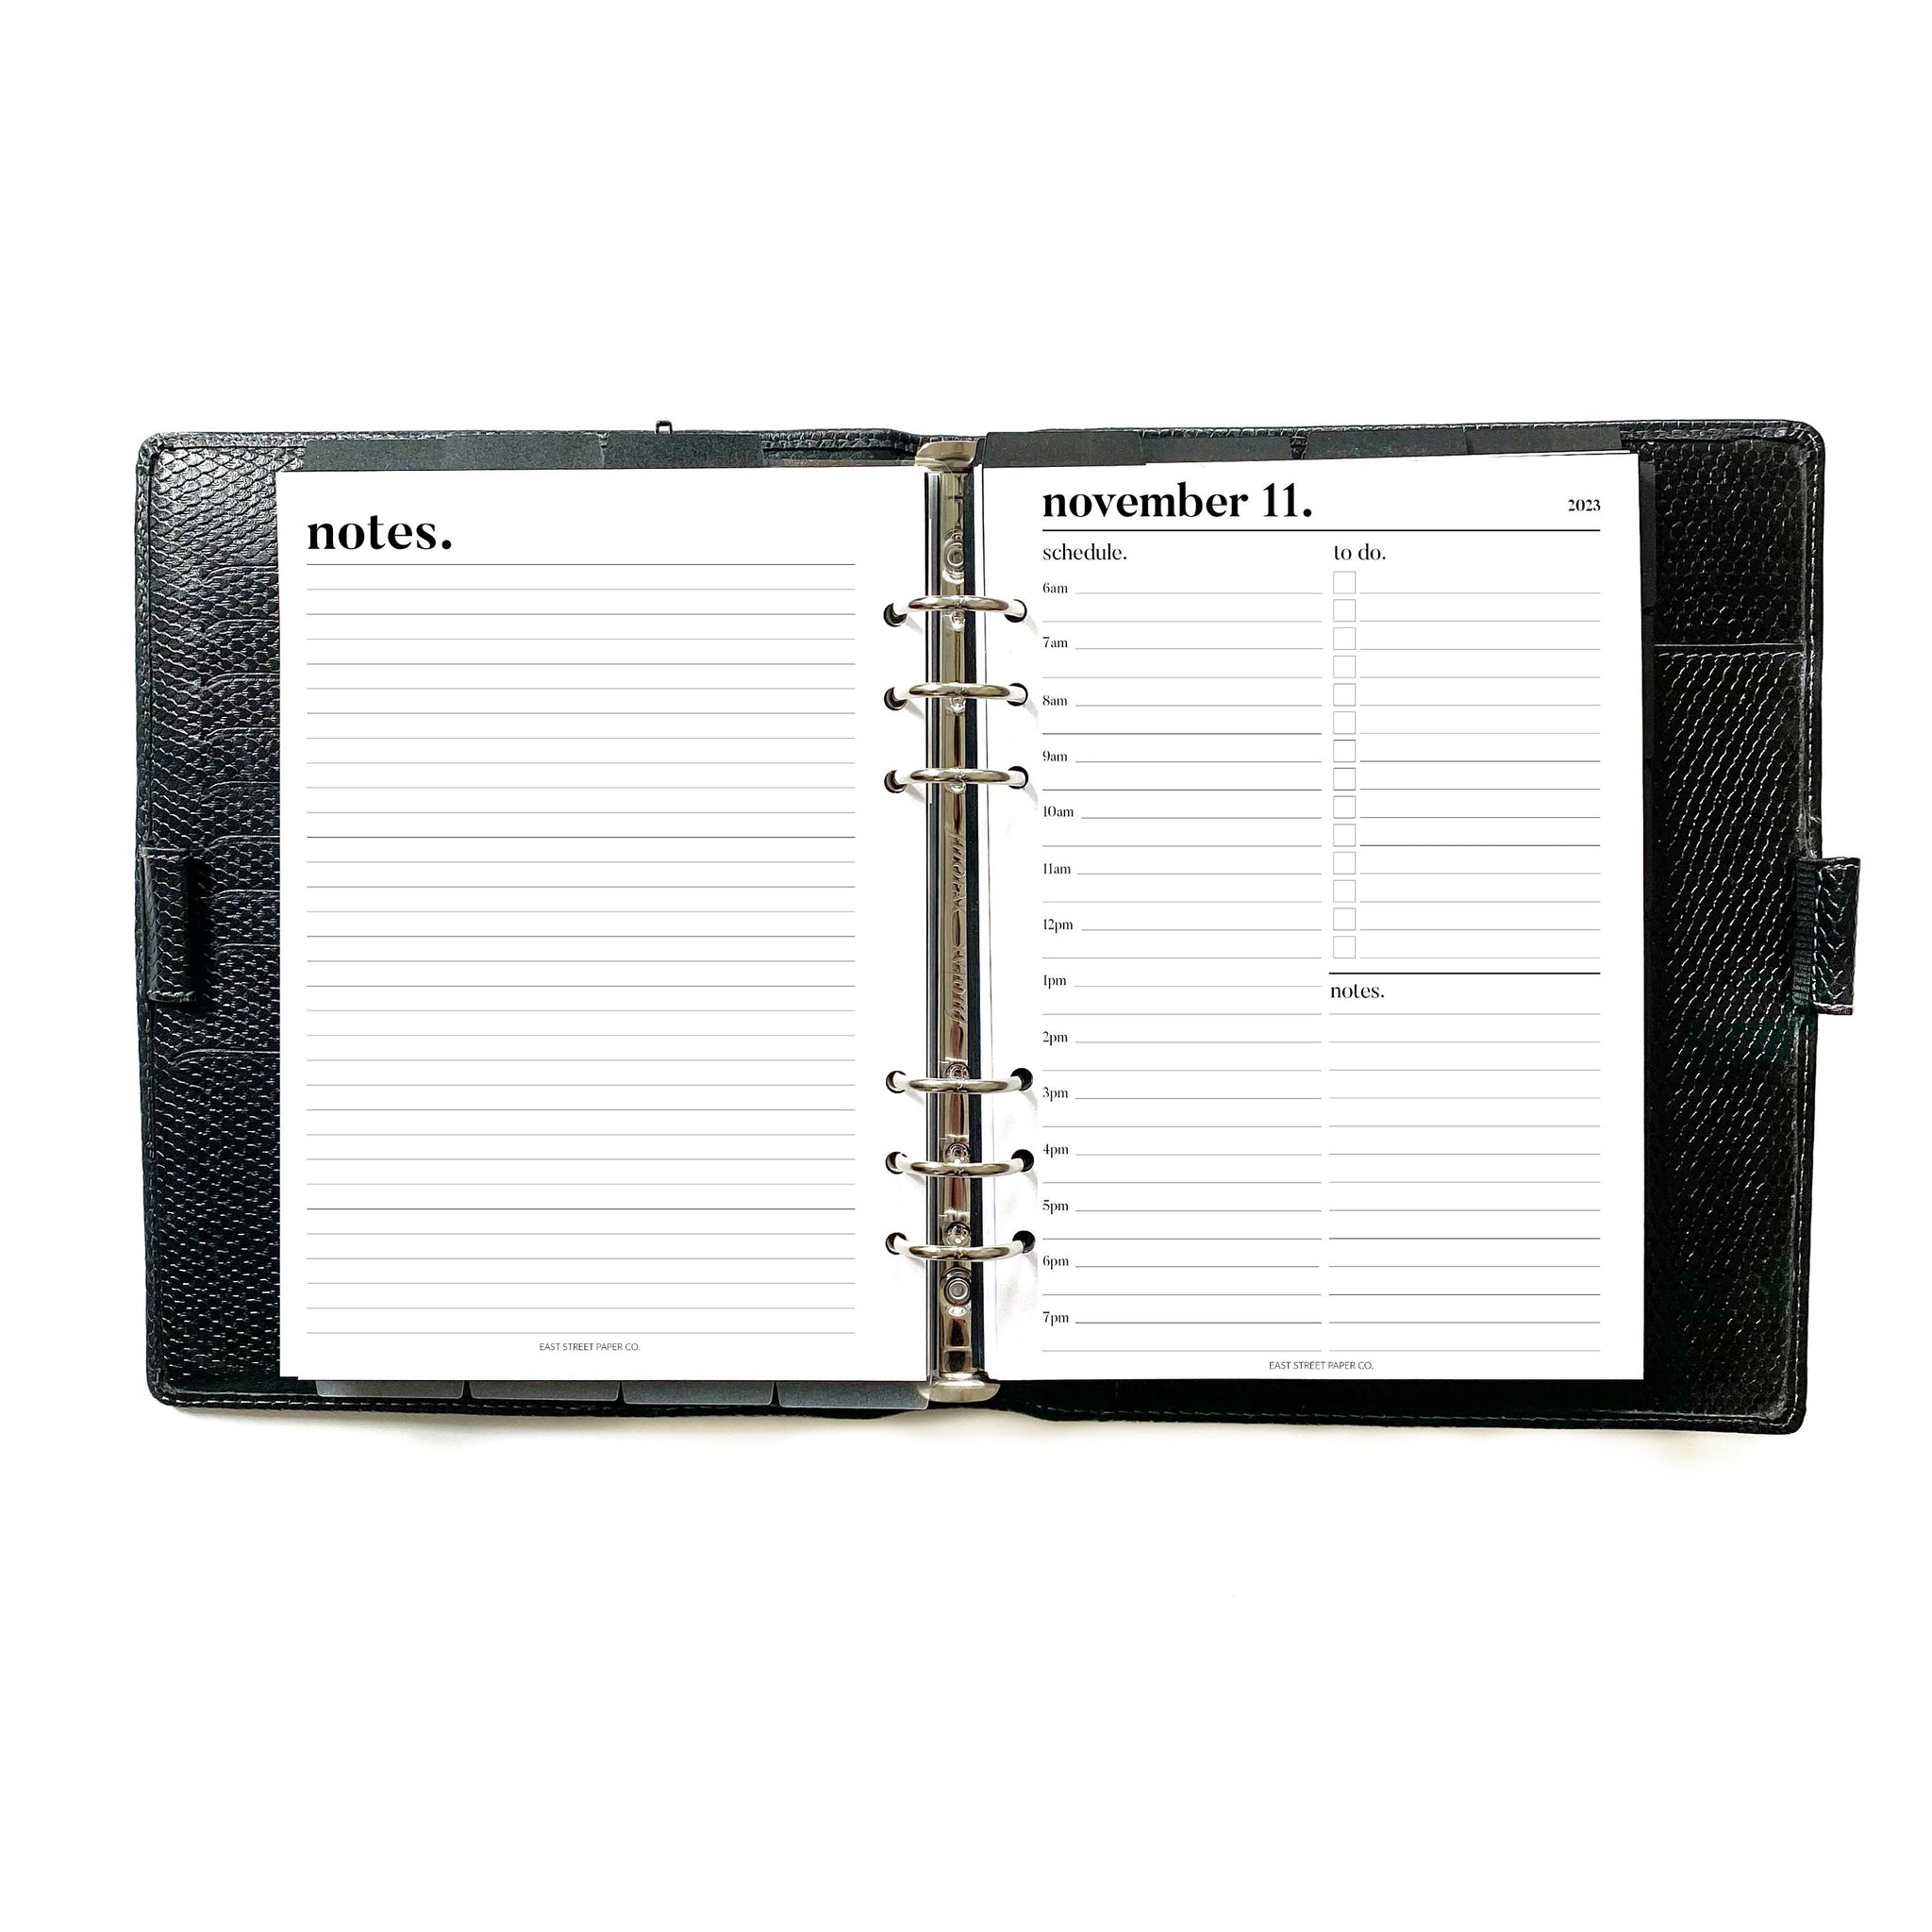 PRINTED A5 Lined Note Planner Inserts 6 Ring Organiser 